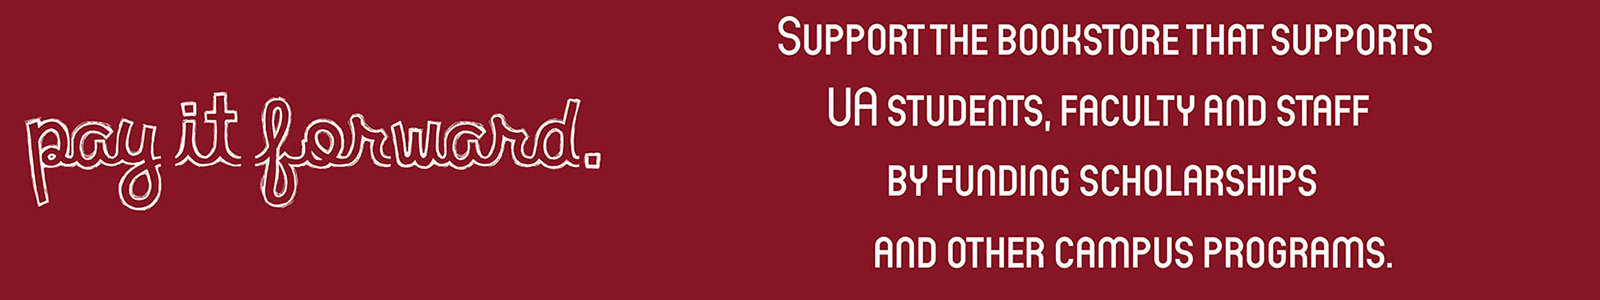 Support the Bookstore that supports UA students, Faculty, and Staff by funding scholarships and other campus programs